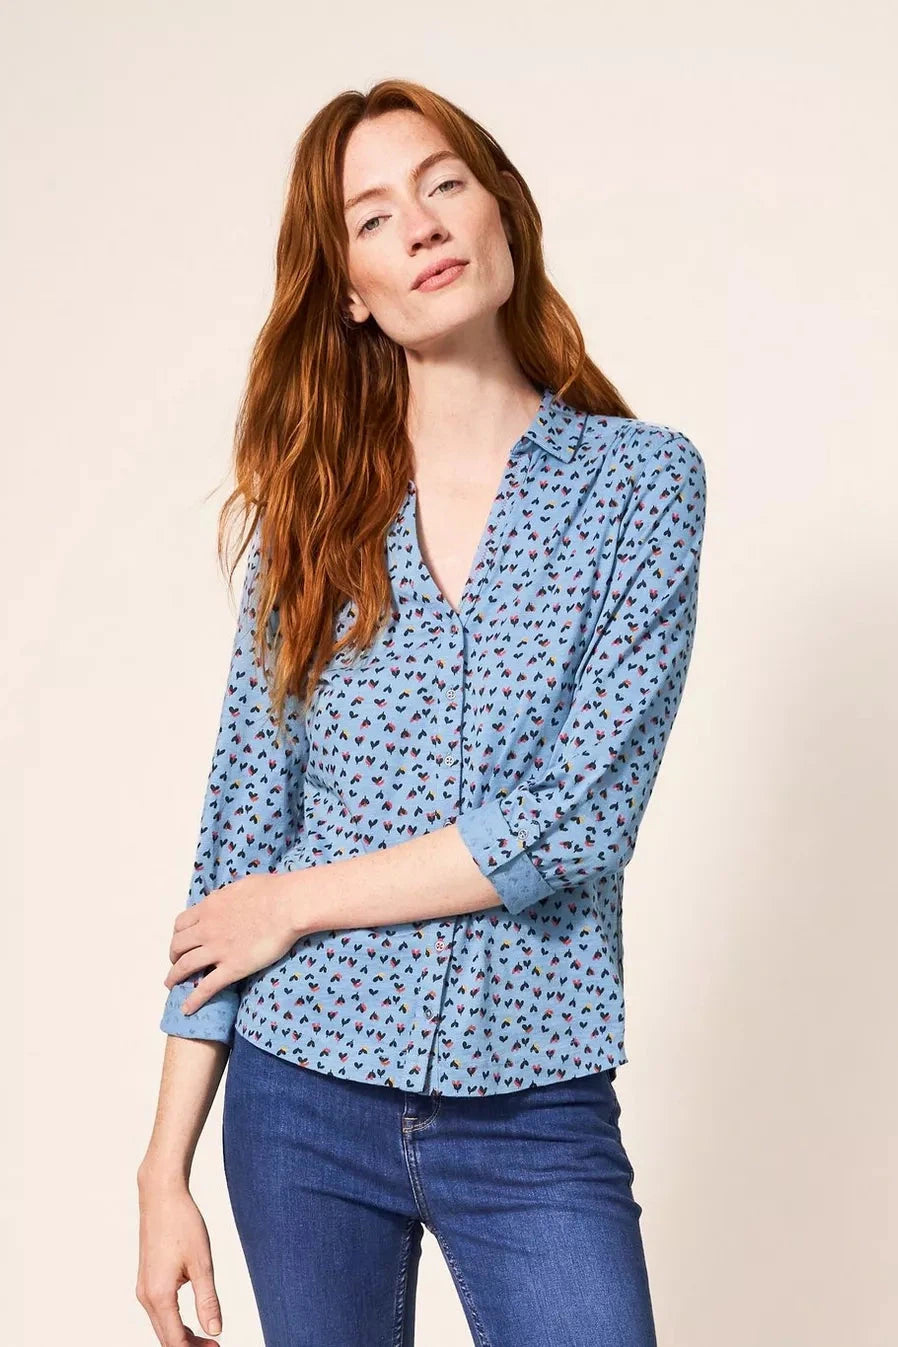 White Stuff Annie Cotton Jersey Shirt - Teal Multi-Womens-Ohh! By Gum - Shop Sustainable